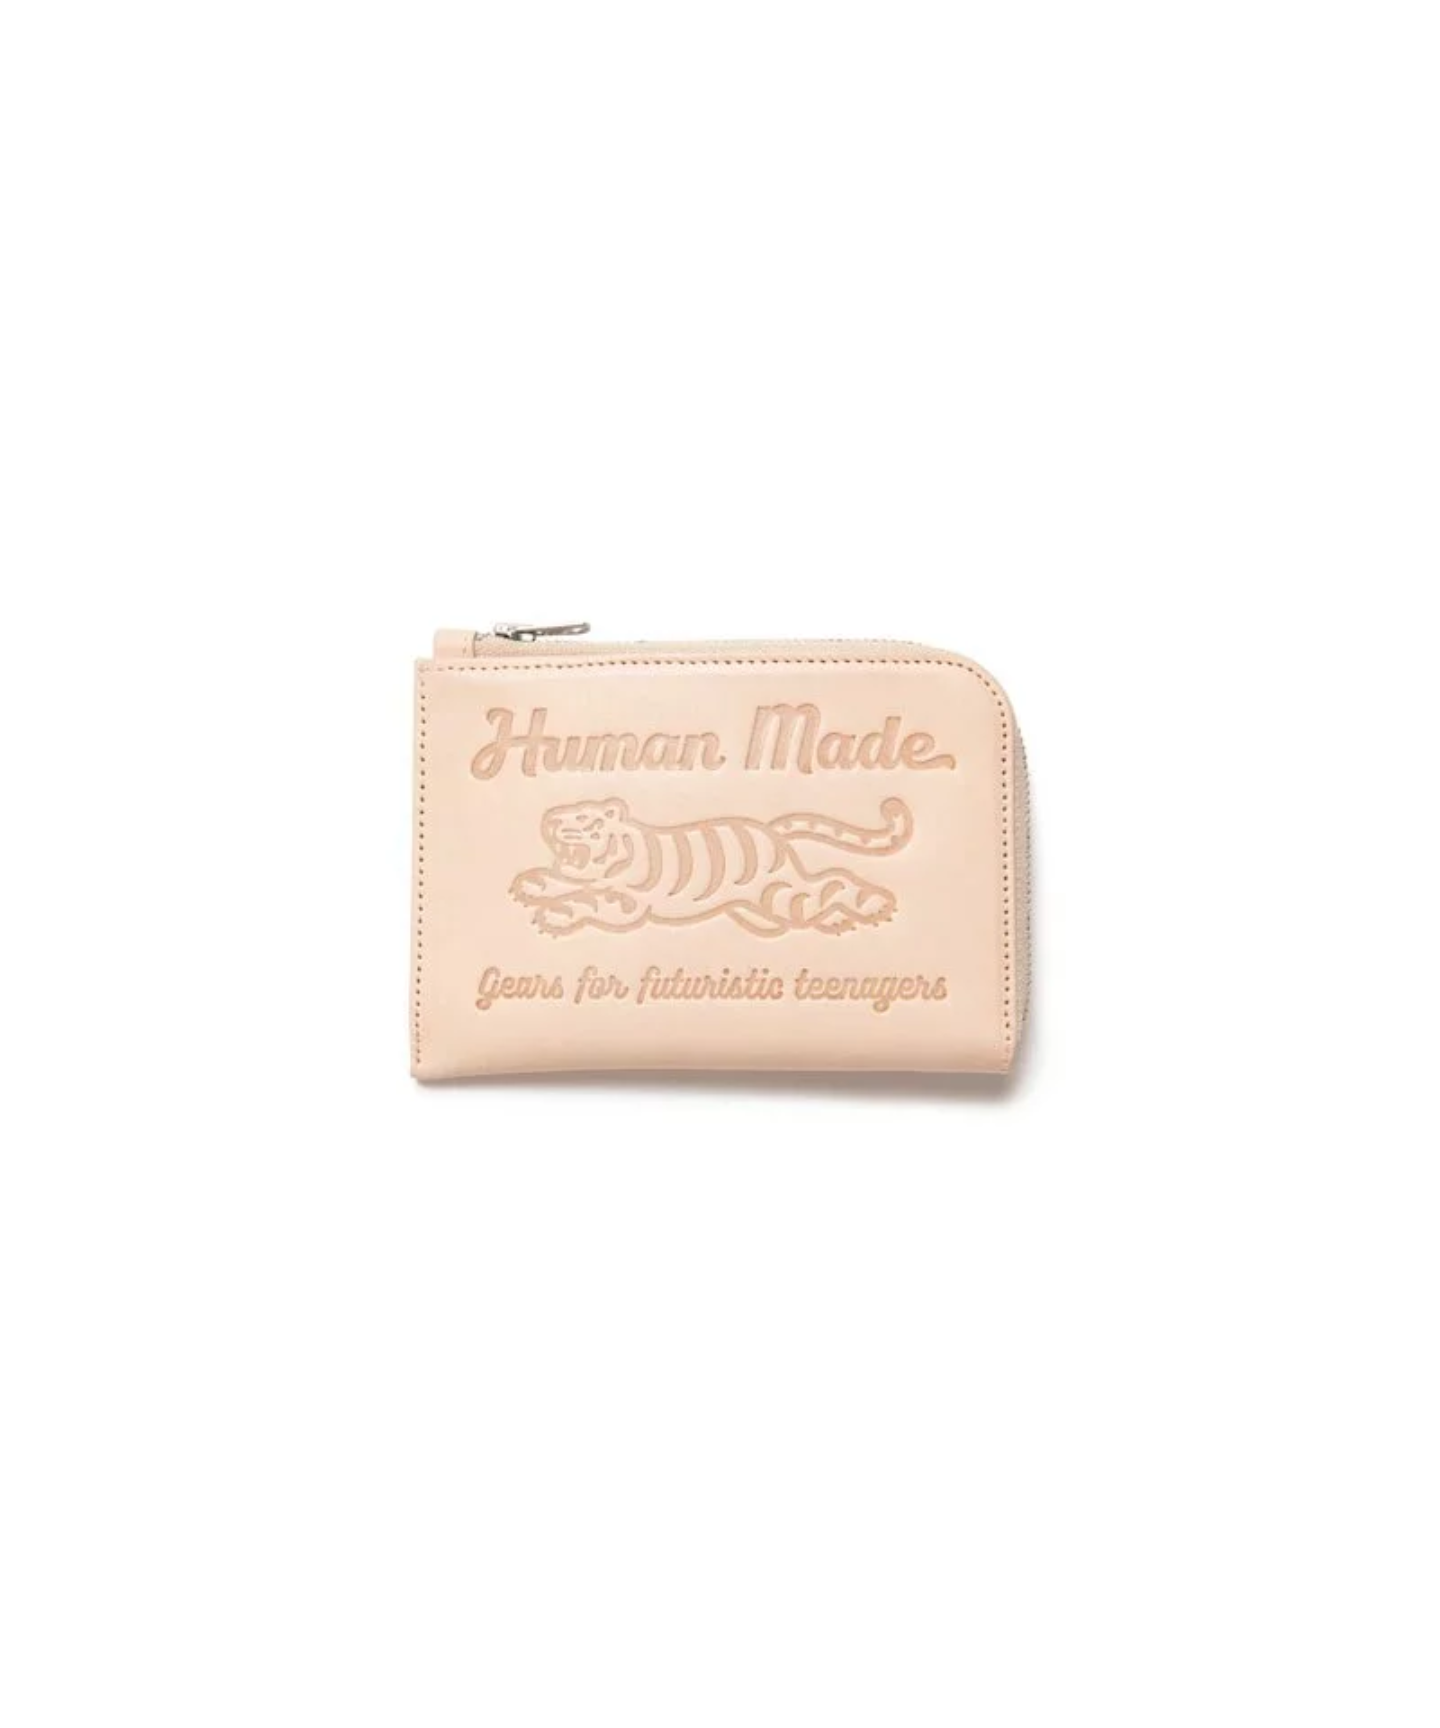 TW HUMAN MADE 46 LEATHER WALLET 皮革錢包｜HUMAN MADE｜UNITED